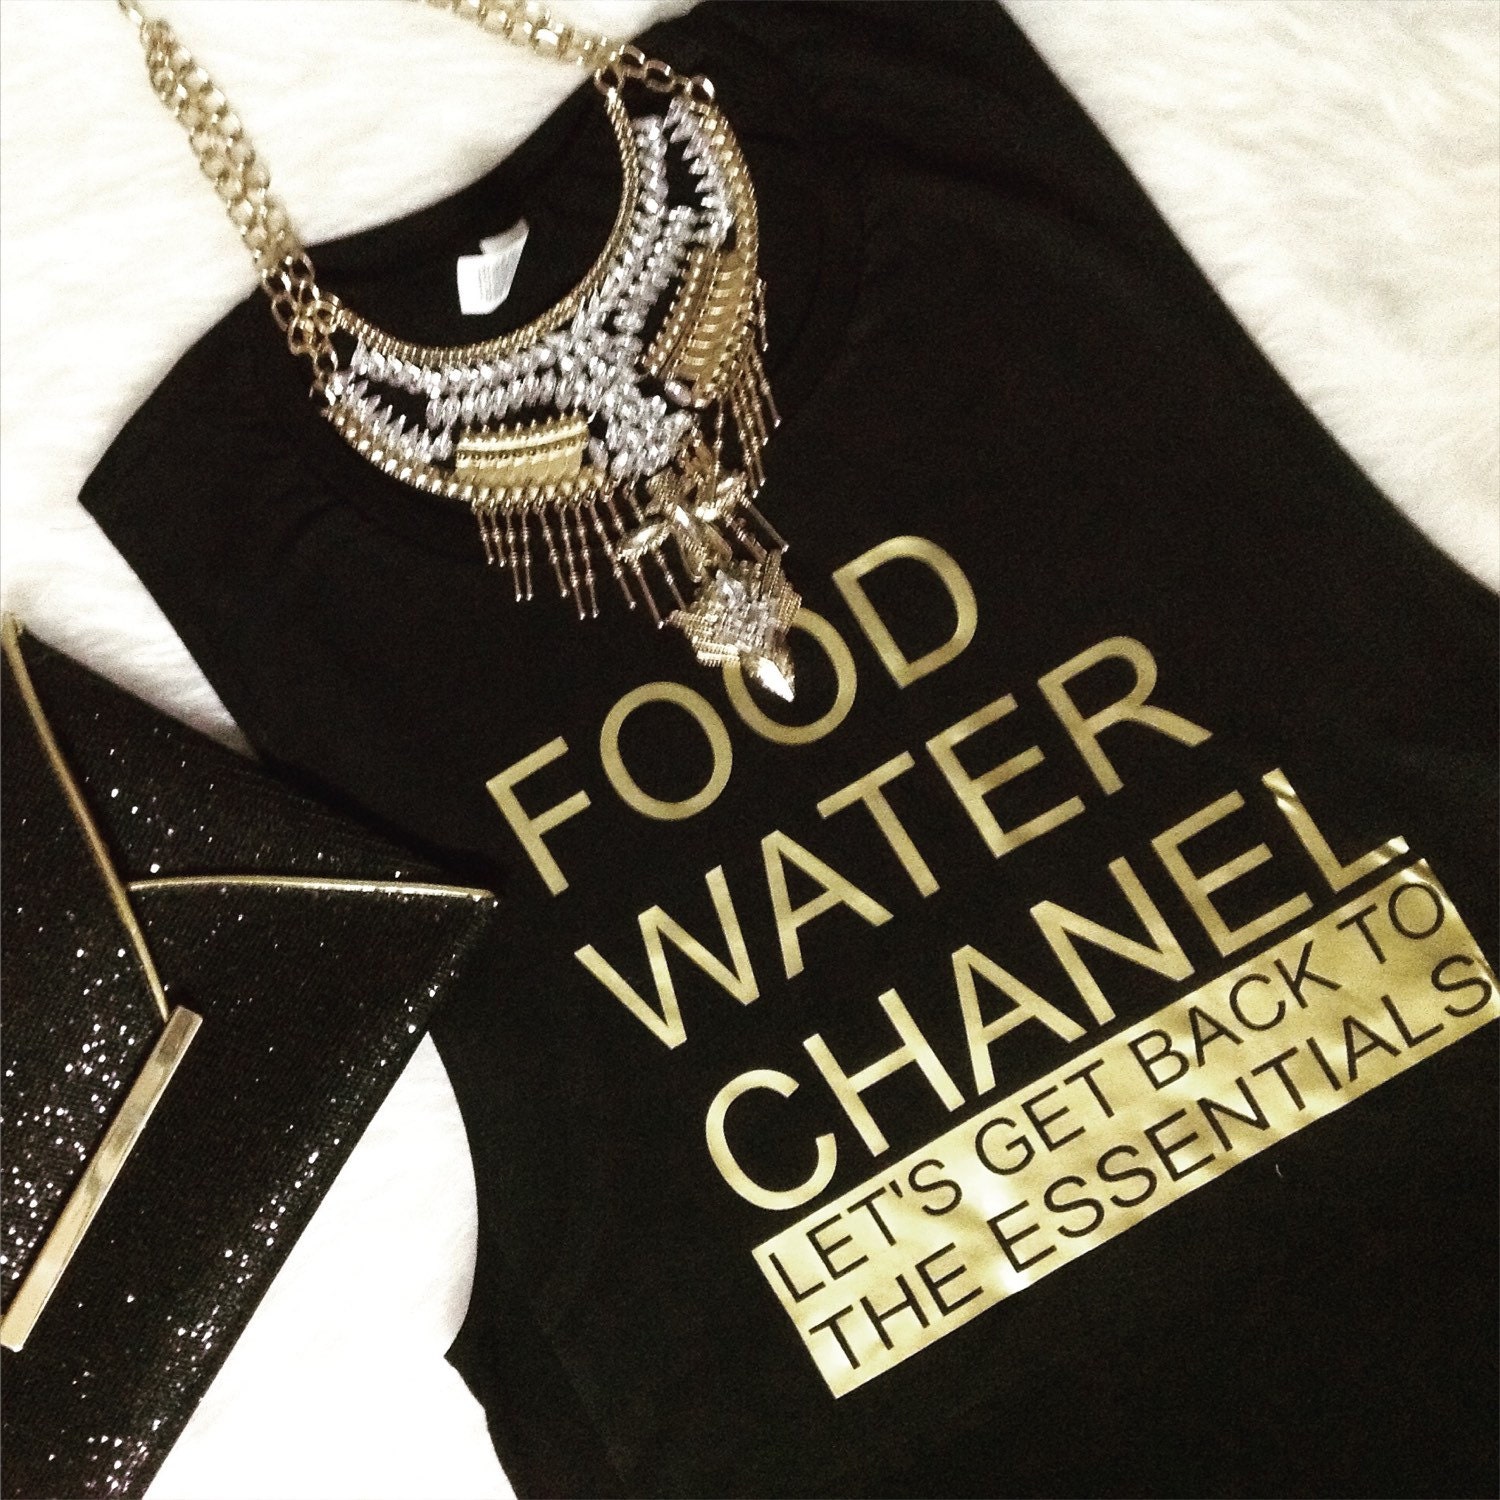 Food Water Chanel Let's Get Back To The Essentials / Statement Tank Graphic Tank Statement Tee Graphic Tee Statement Tshirt  Graphic Tshirt